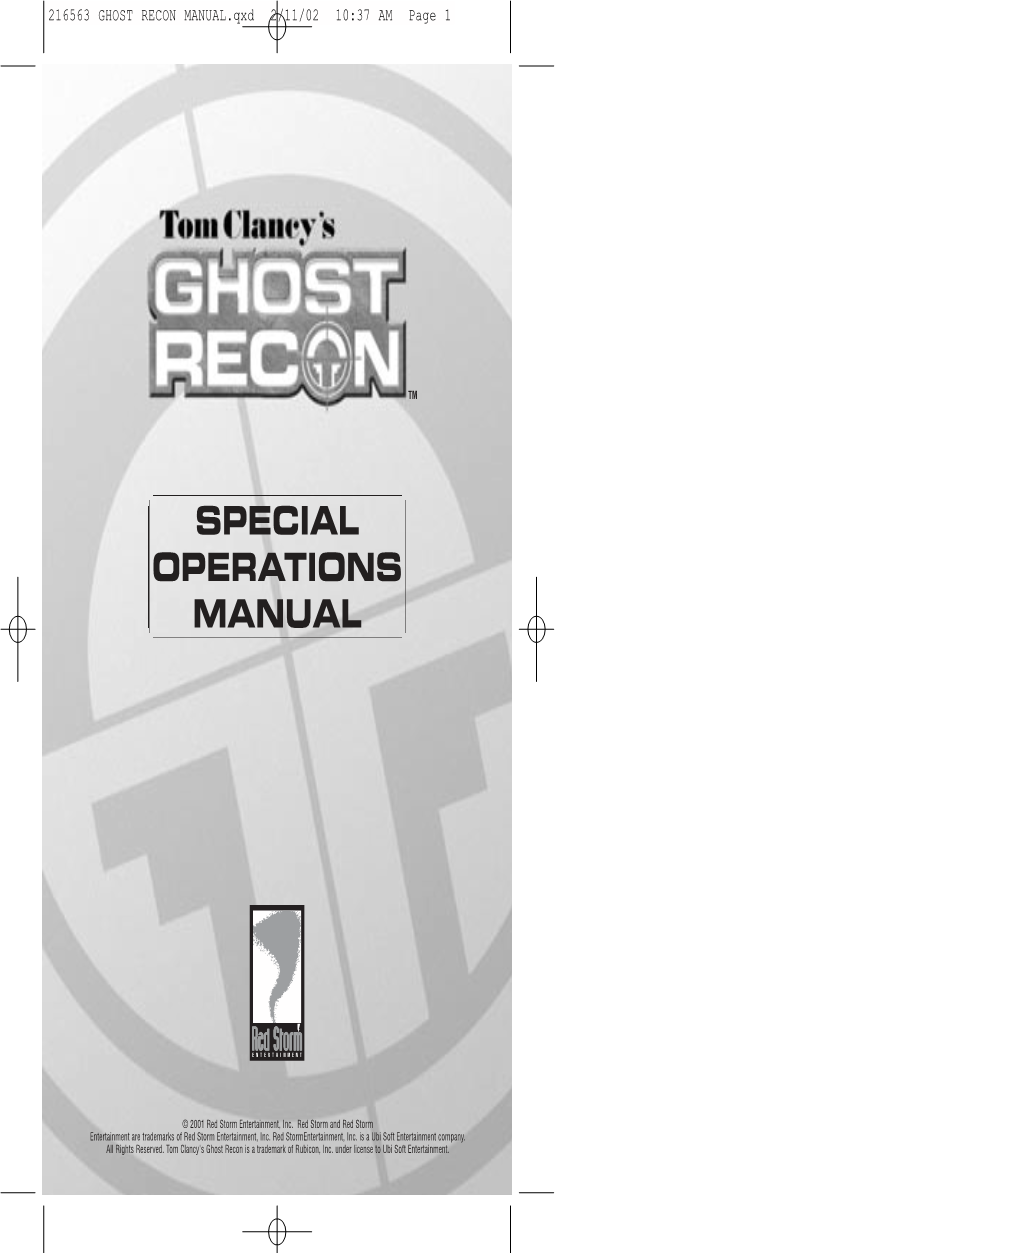 216563 GHOST RECON MANUAL.Qxd 2/11/02 10:37 AM Page 1